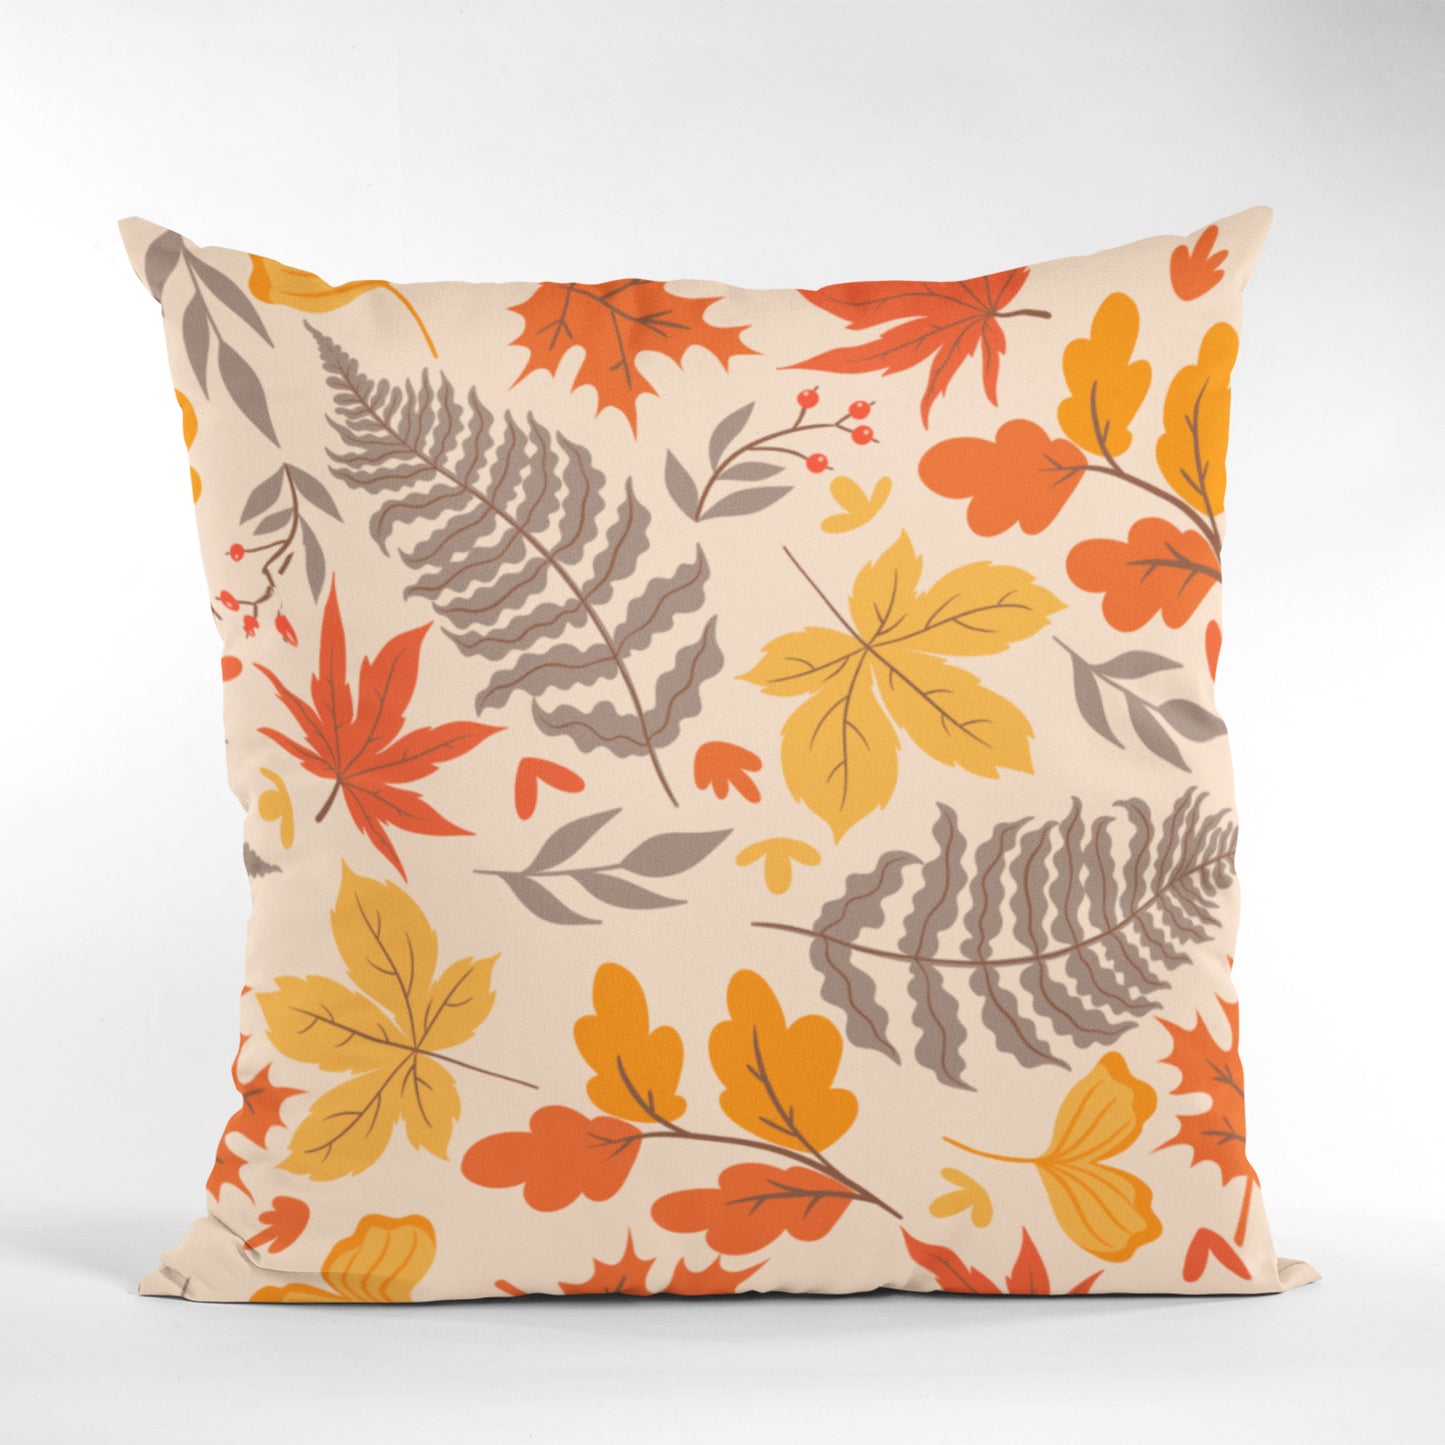 Fall Leaves Printed Cushion Cover, Autumn Home Decor Pillow Case by Homeezone